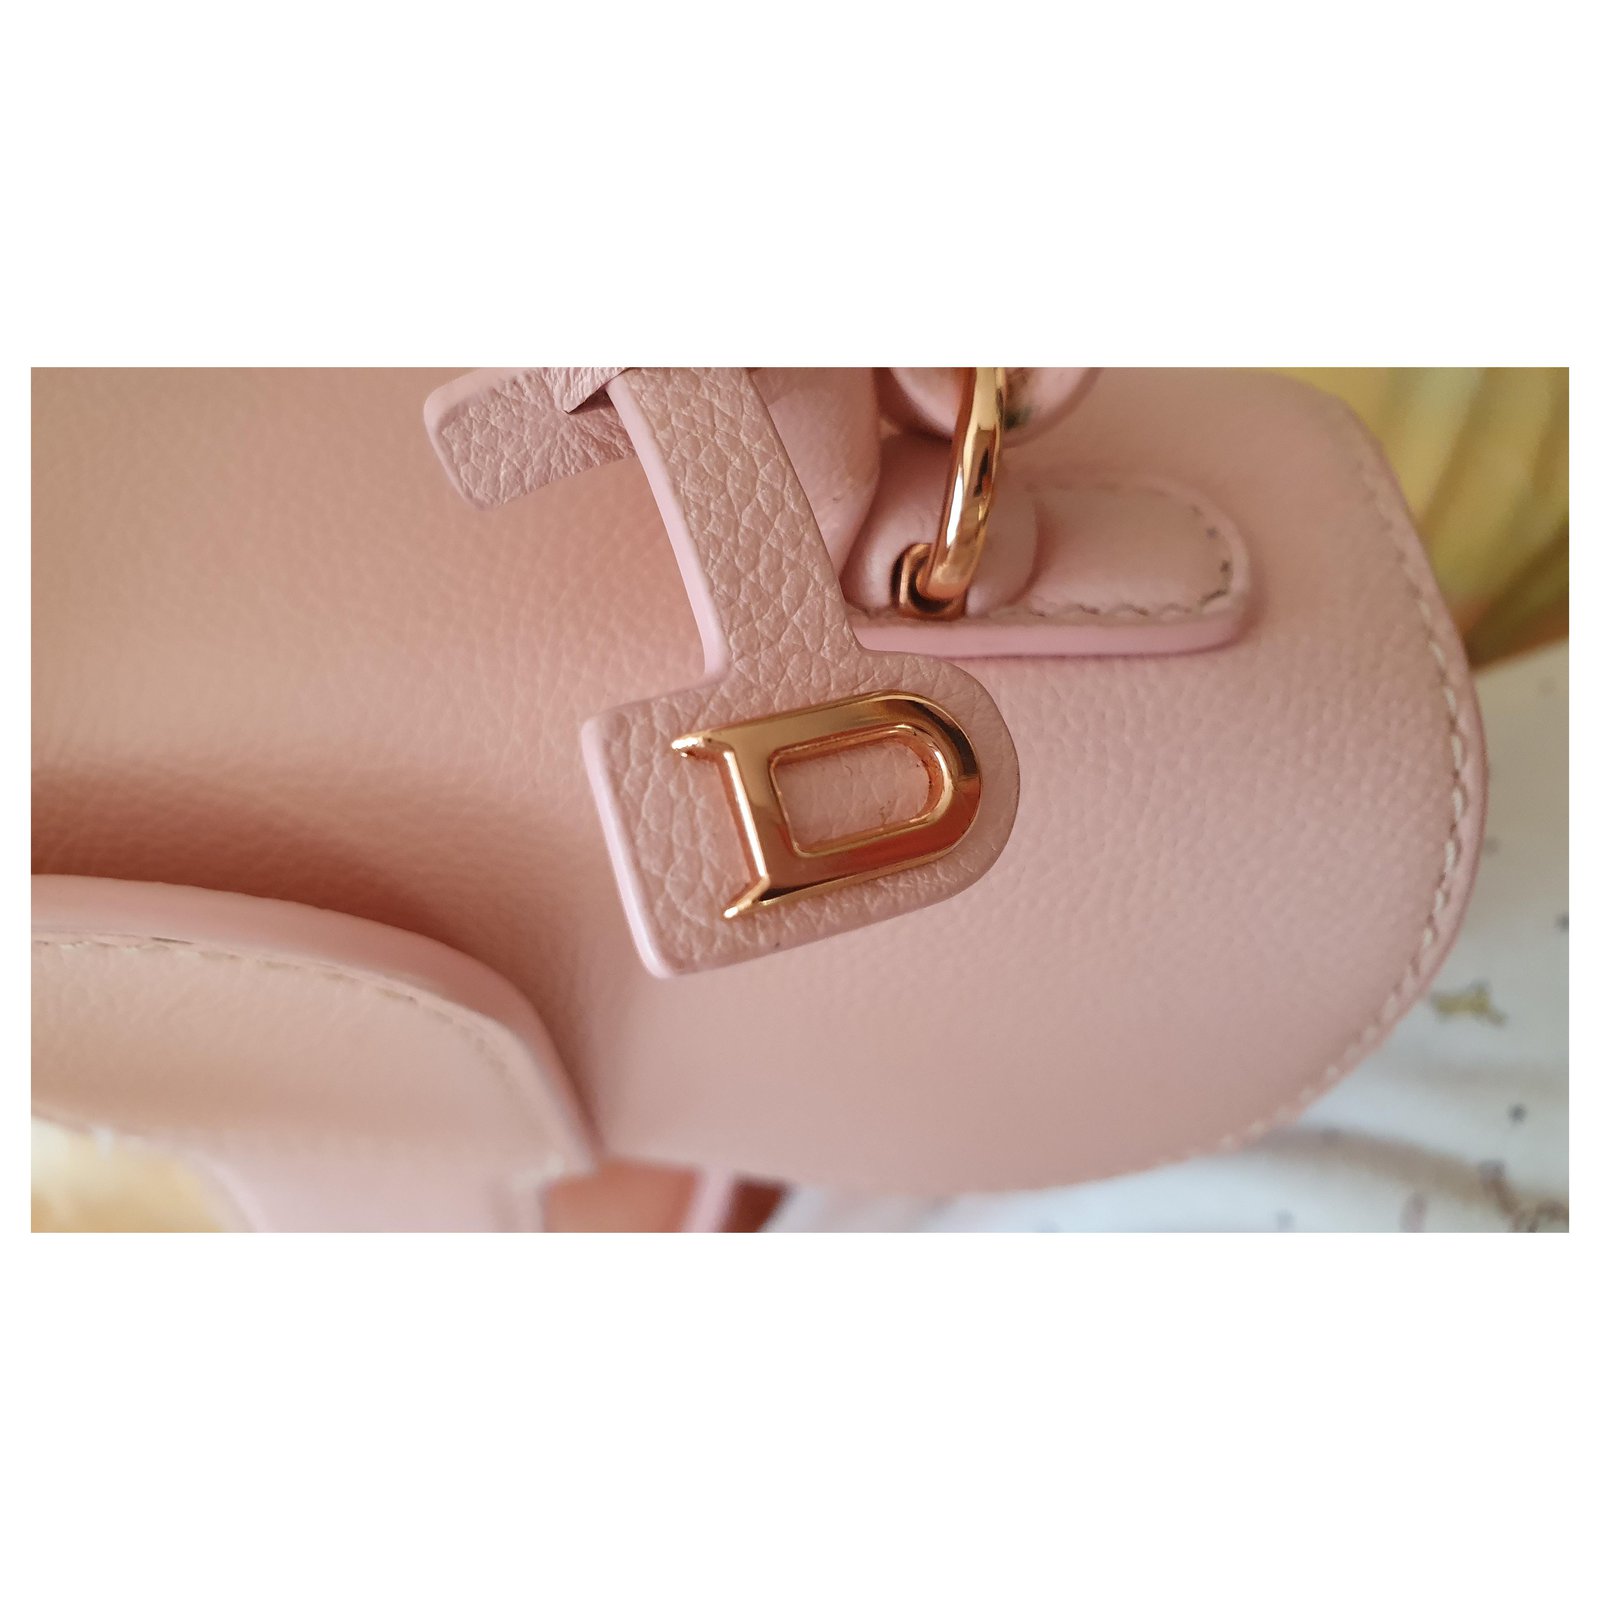 Pre-owned Delvaux Pin Leather Handbag In Pink